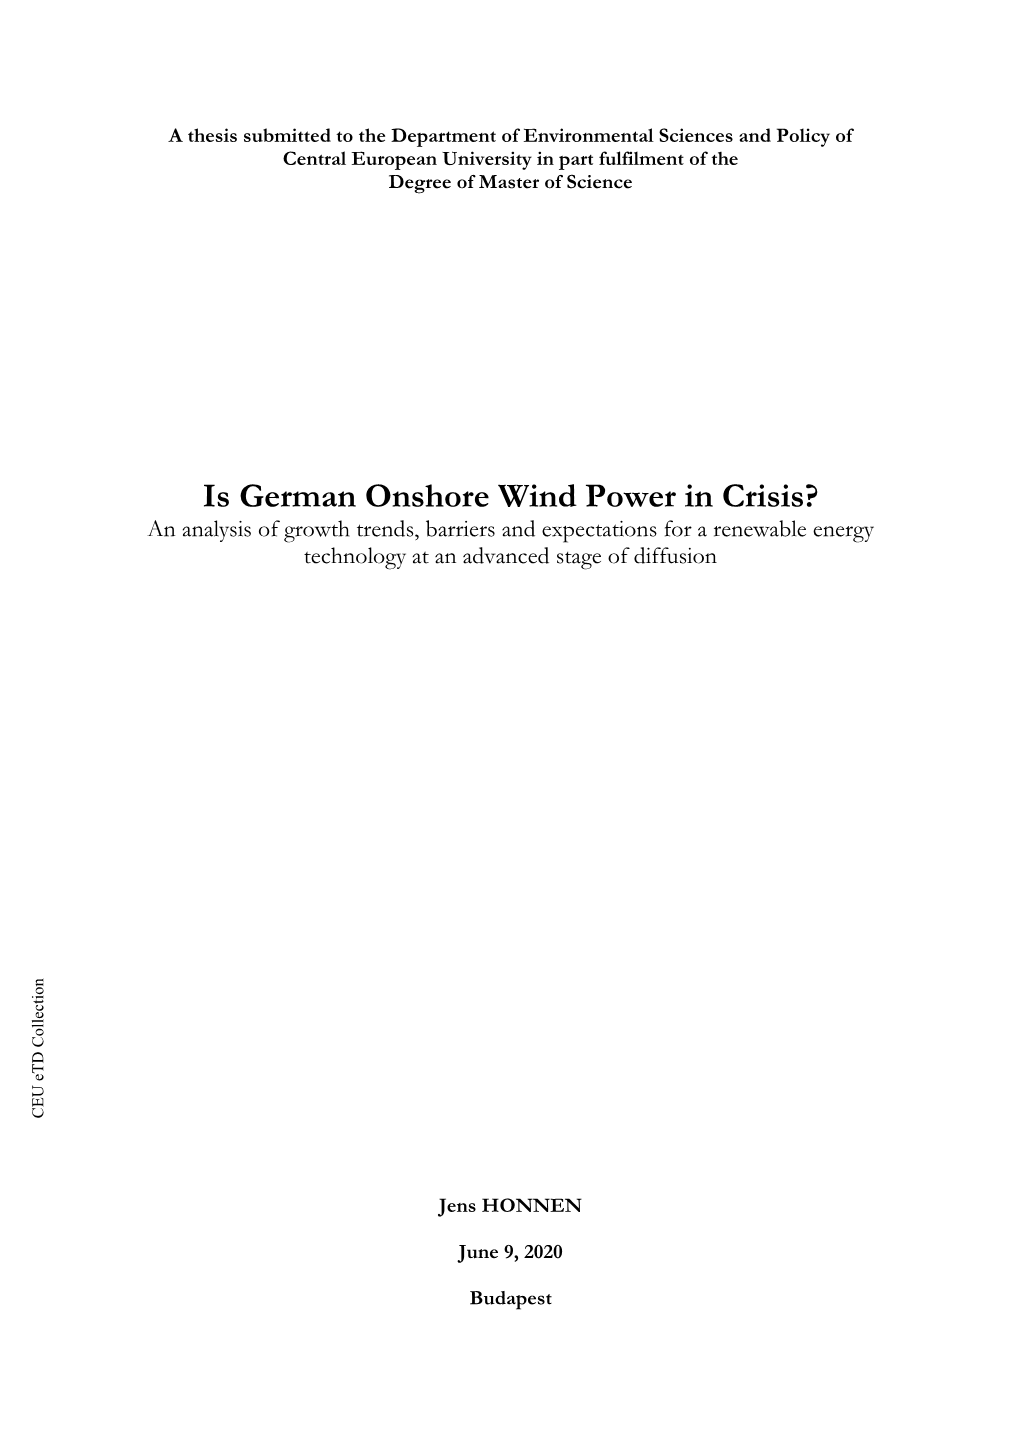 Is German Onshore Wind Power in Crisis? an Analysis of Growth Trends, Barriers and Expectations for a Renewable Energy Technology at an Advanced Stage of Diffusion